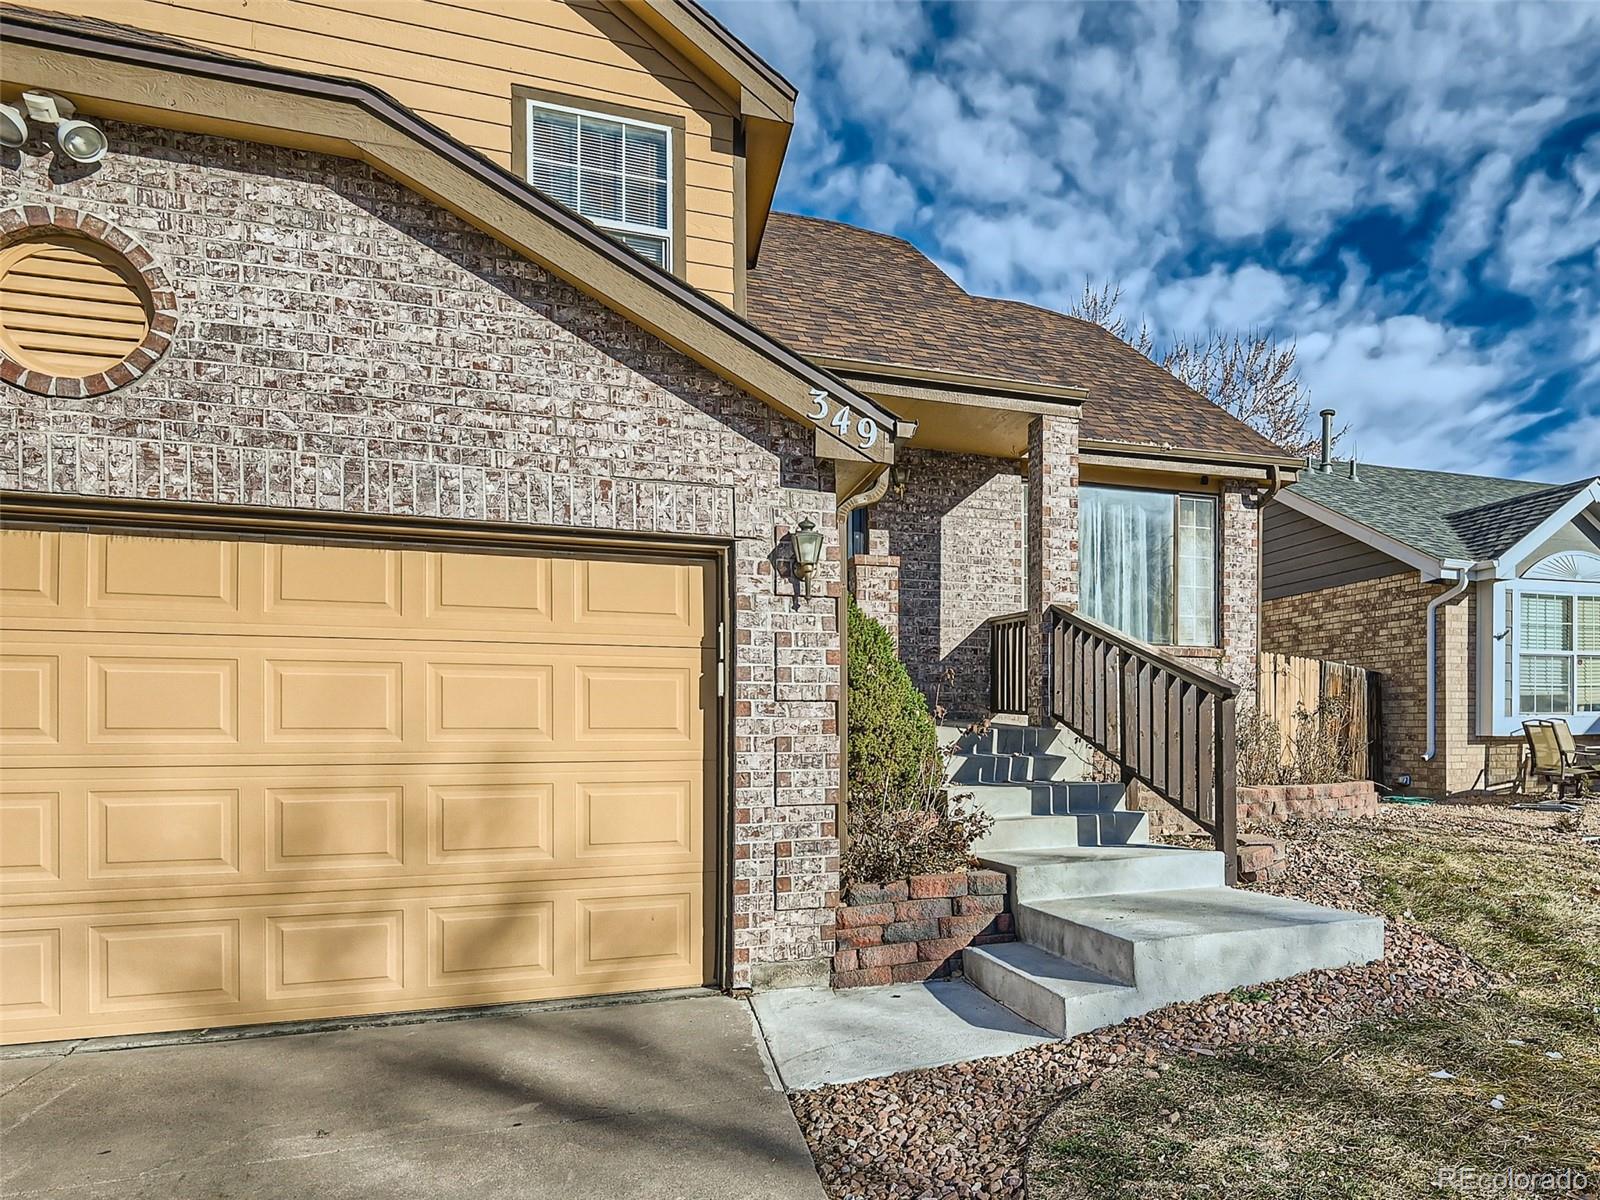 Report Image for 349 W 116th Way,Northglenn, Colorado